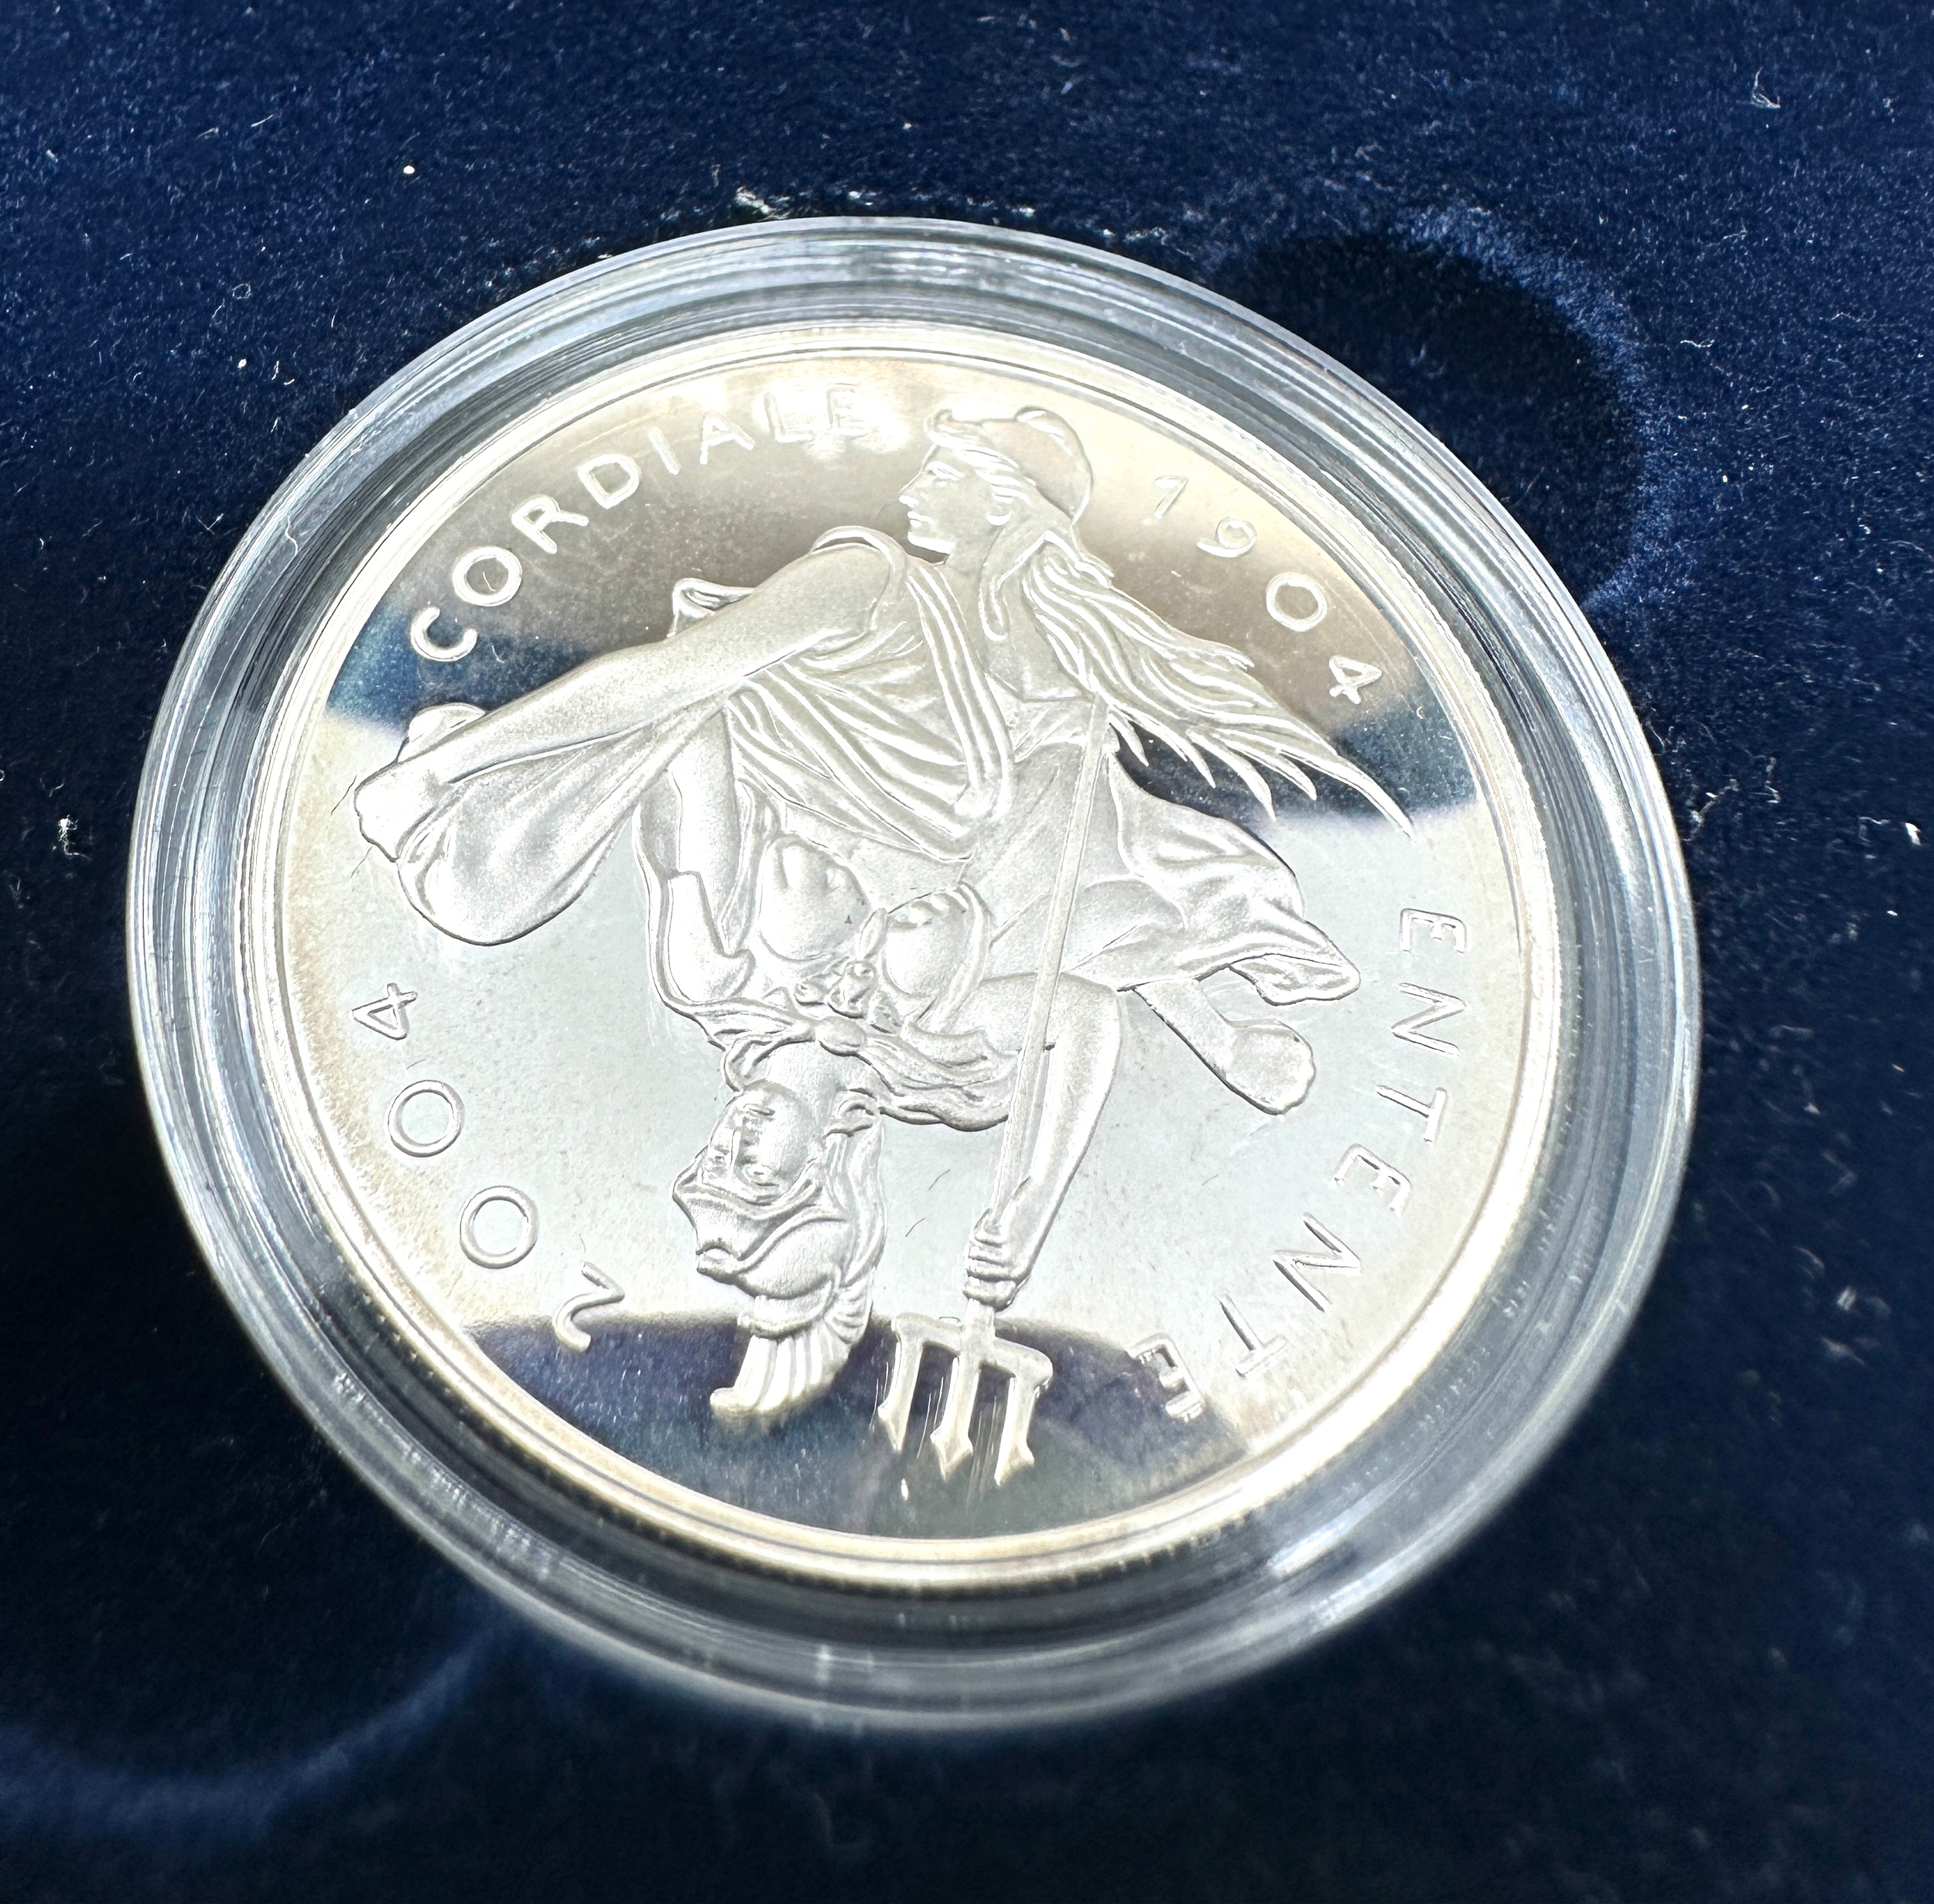 2004 Royal Mint Entente Cordiale £5 Five Pound Silver Proof Coin Boxed - Image 2 of 3